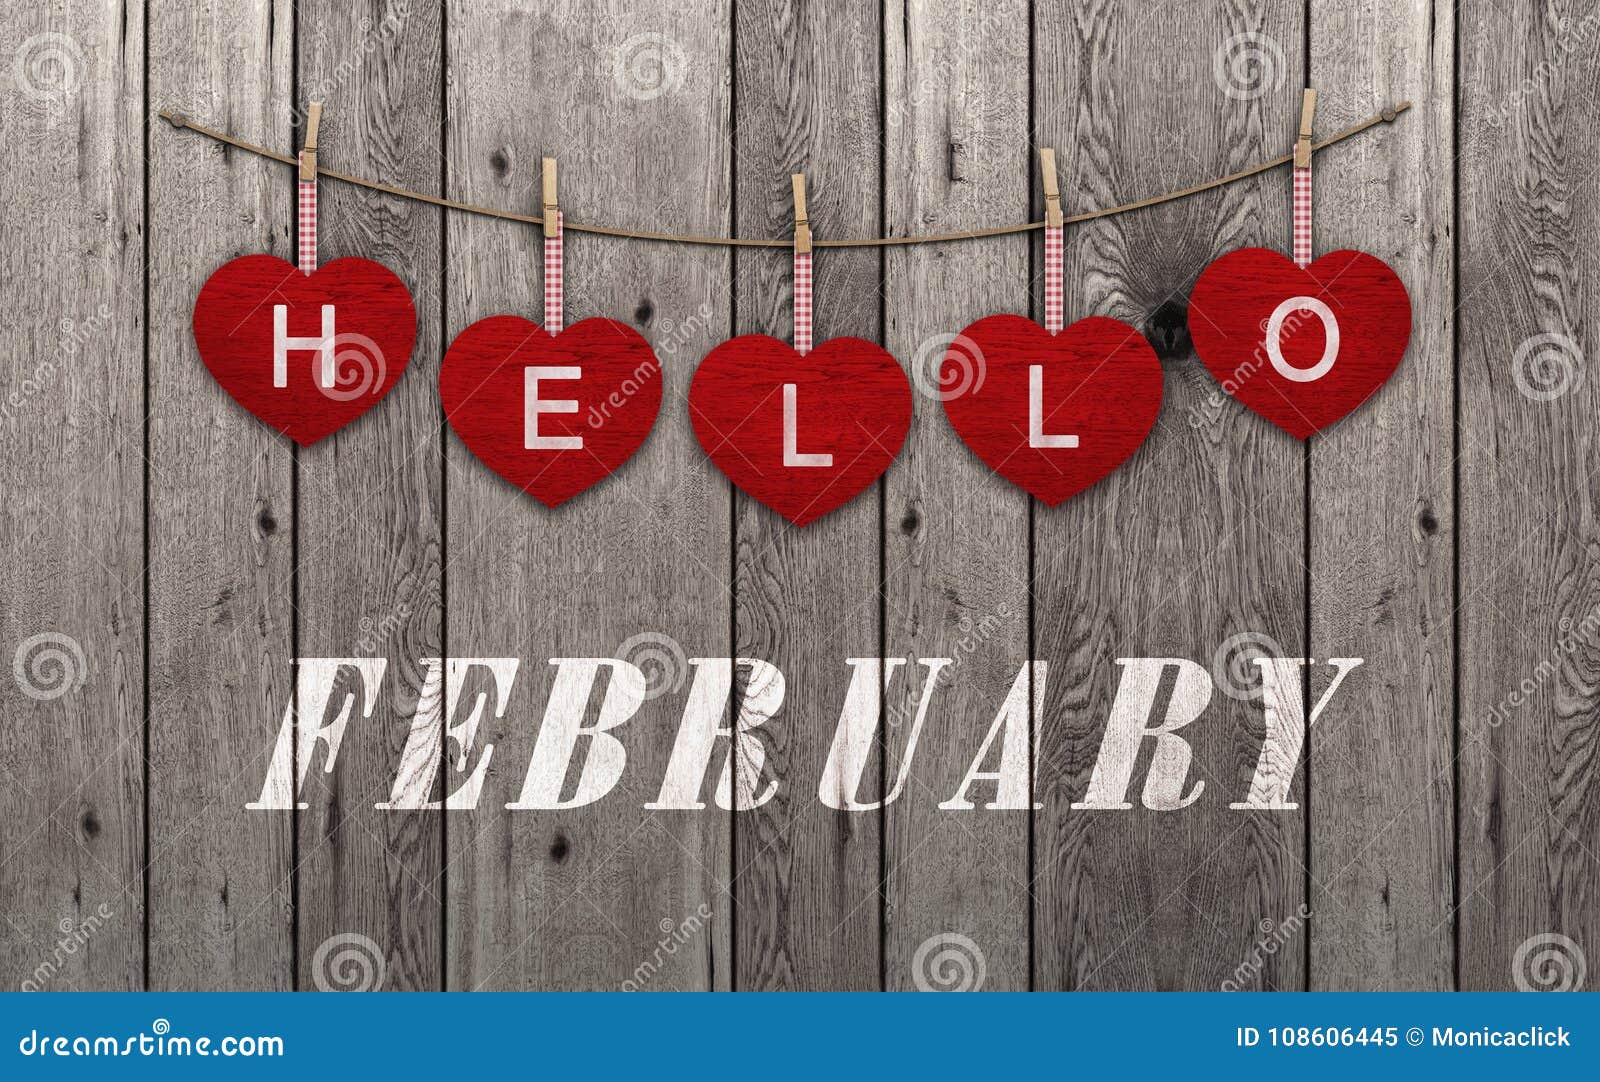 hello february written on hanging red hearts and old wooden background